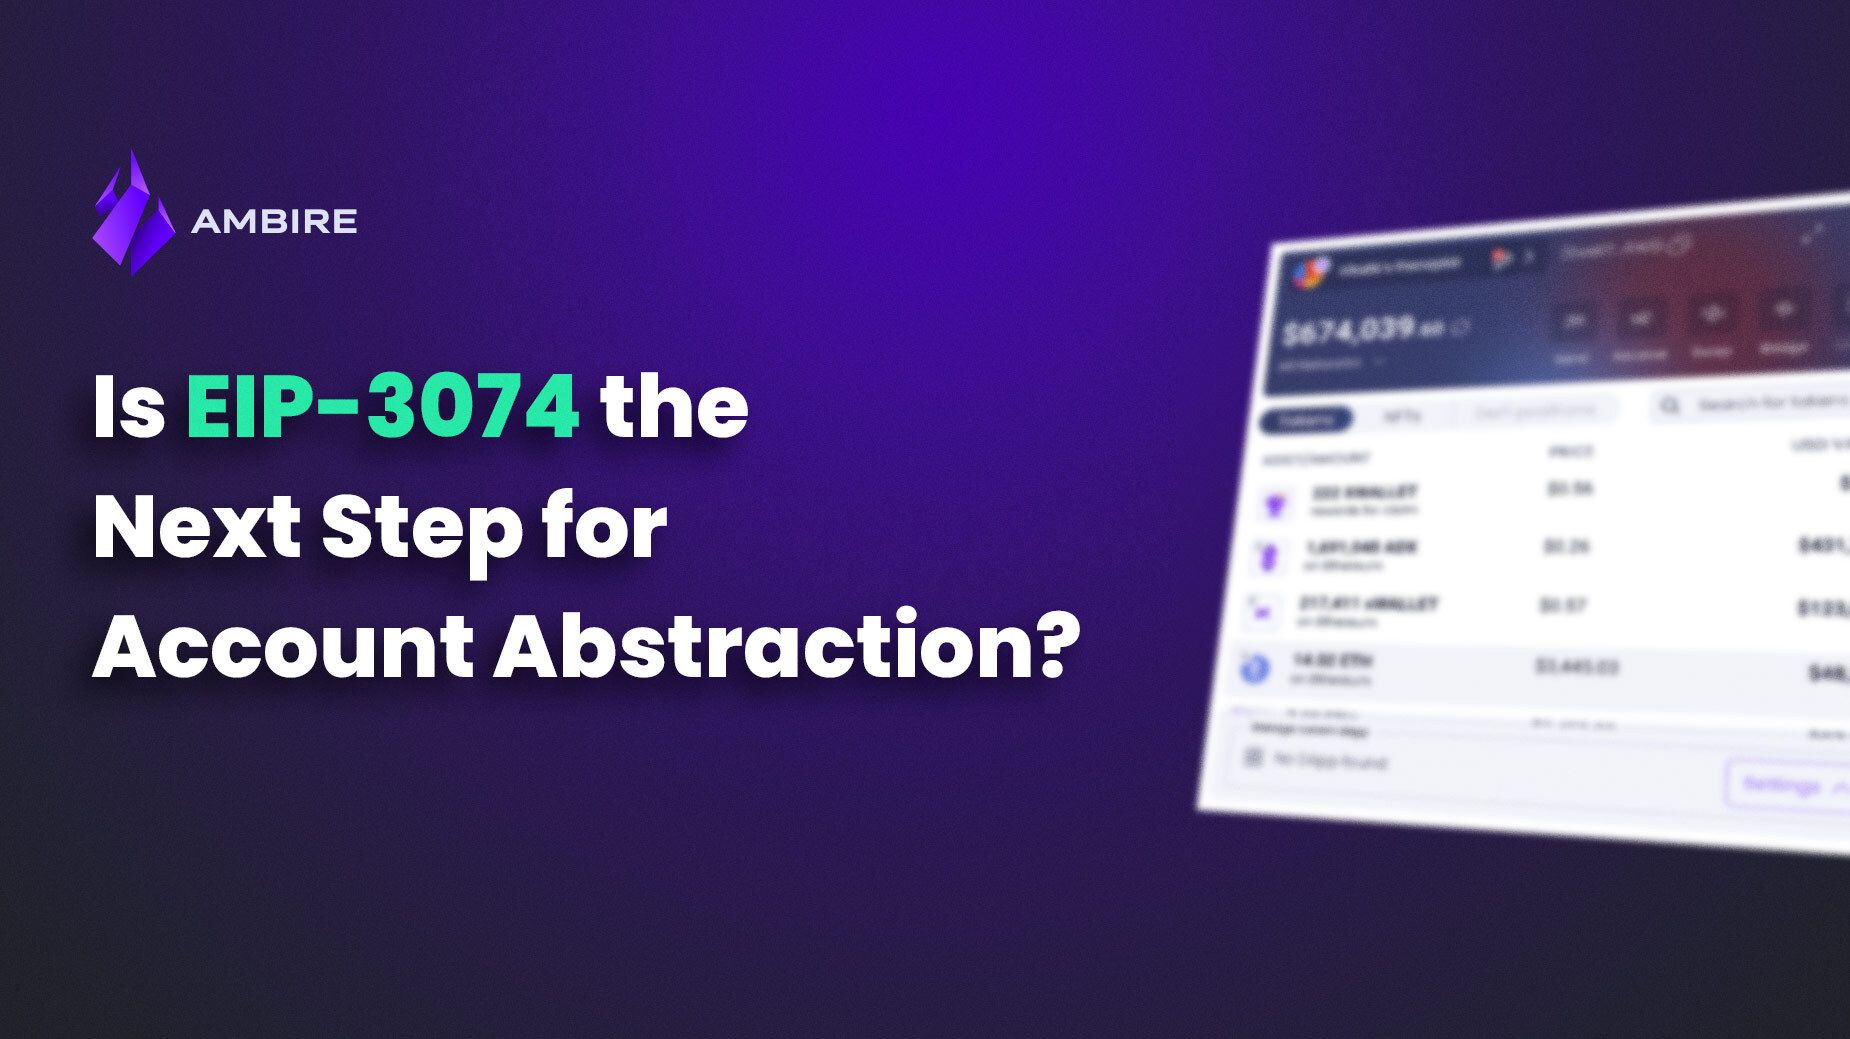 Is EIP-3074 the Next Step for Account Abstraction?